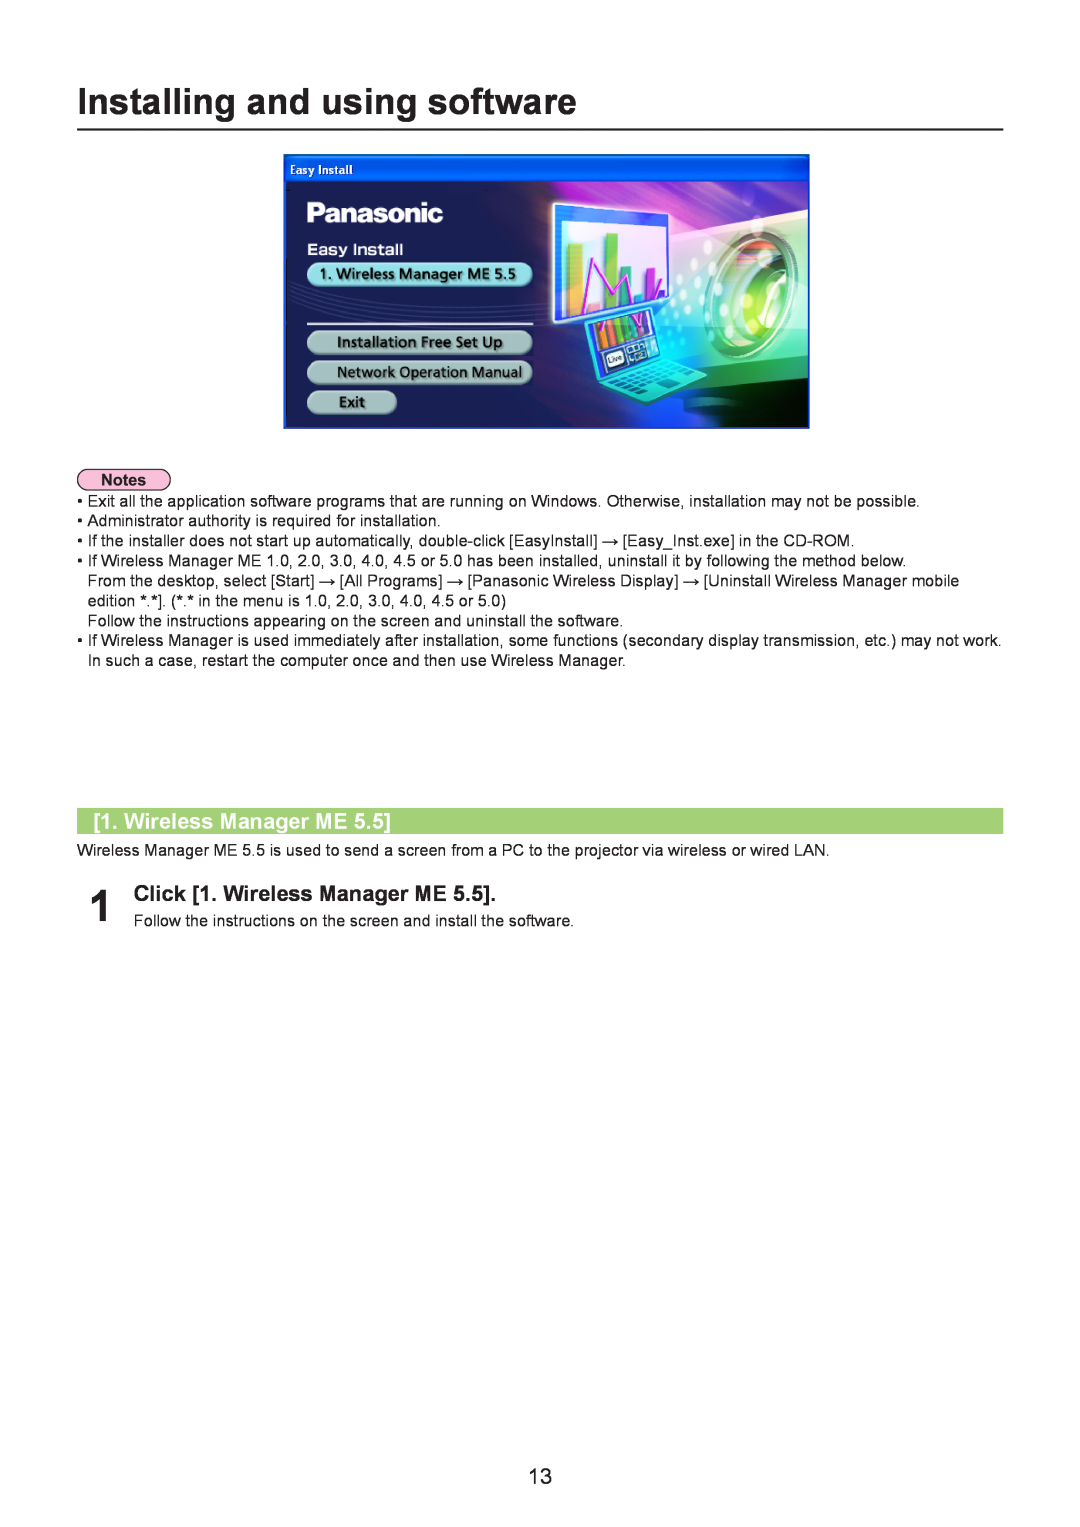 Panasonic TQBH0205-4 operation manual Installing and using software, Click 1. Wireless Manager ME 